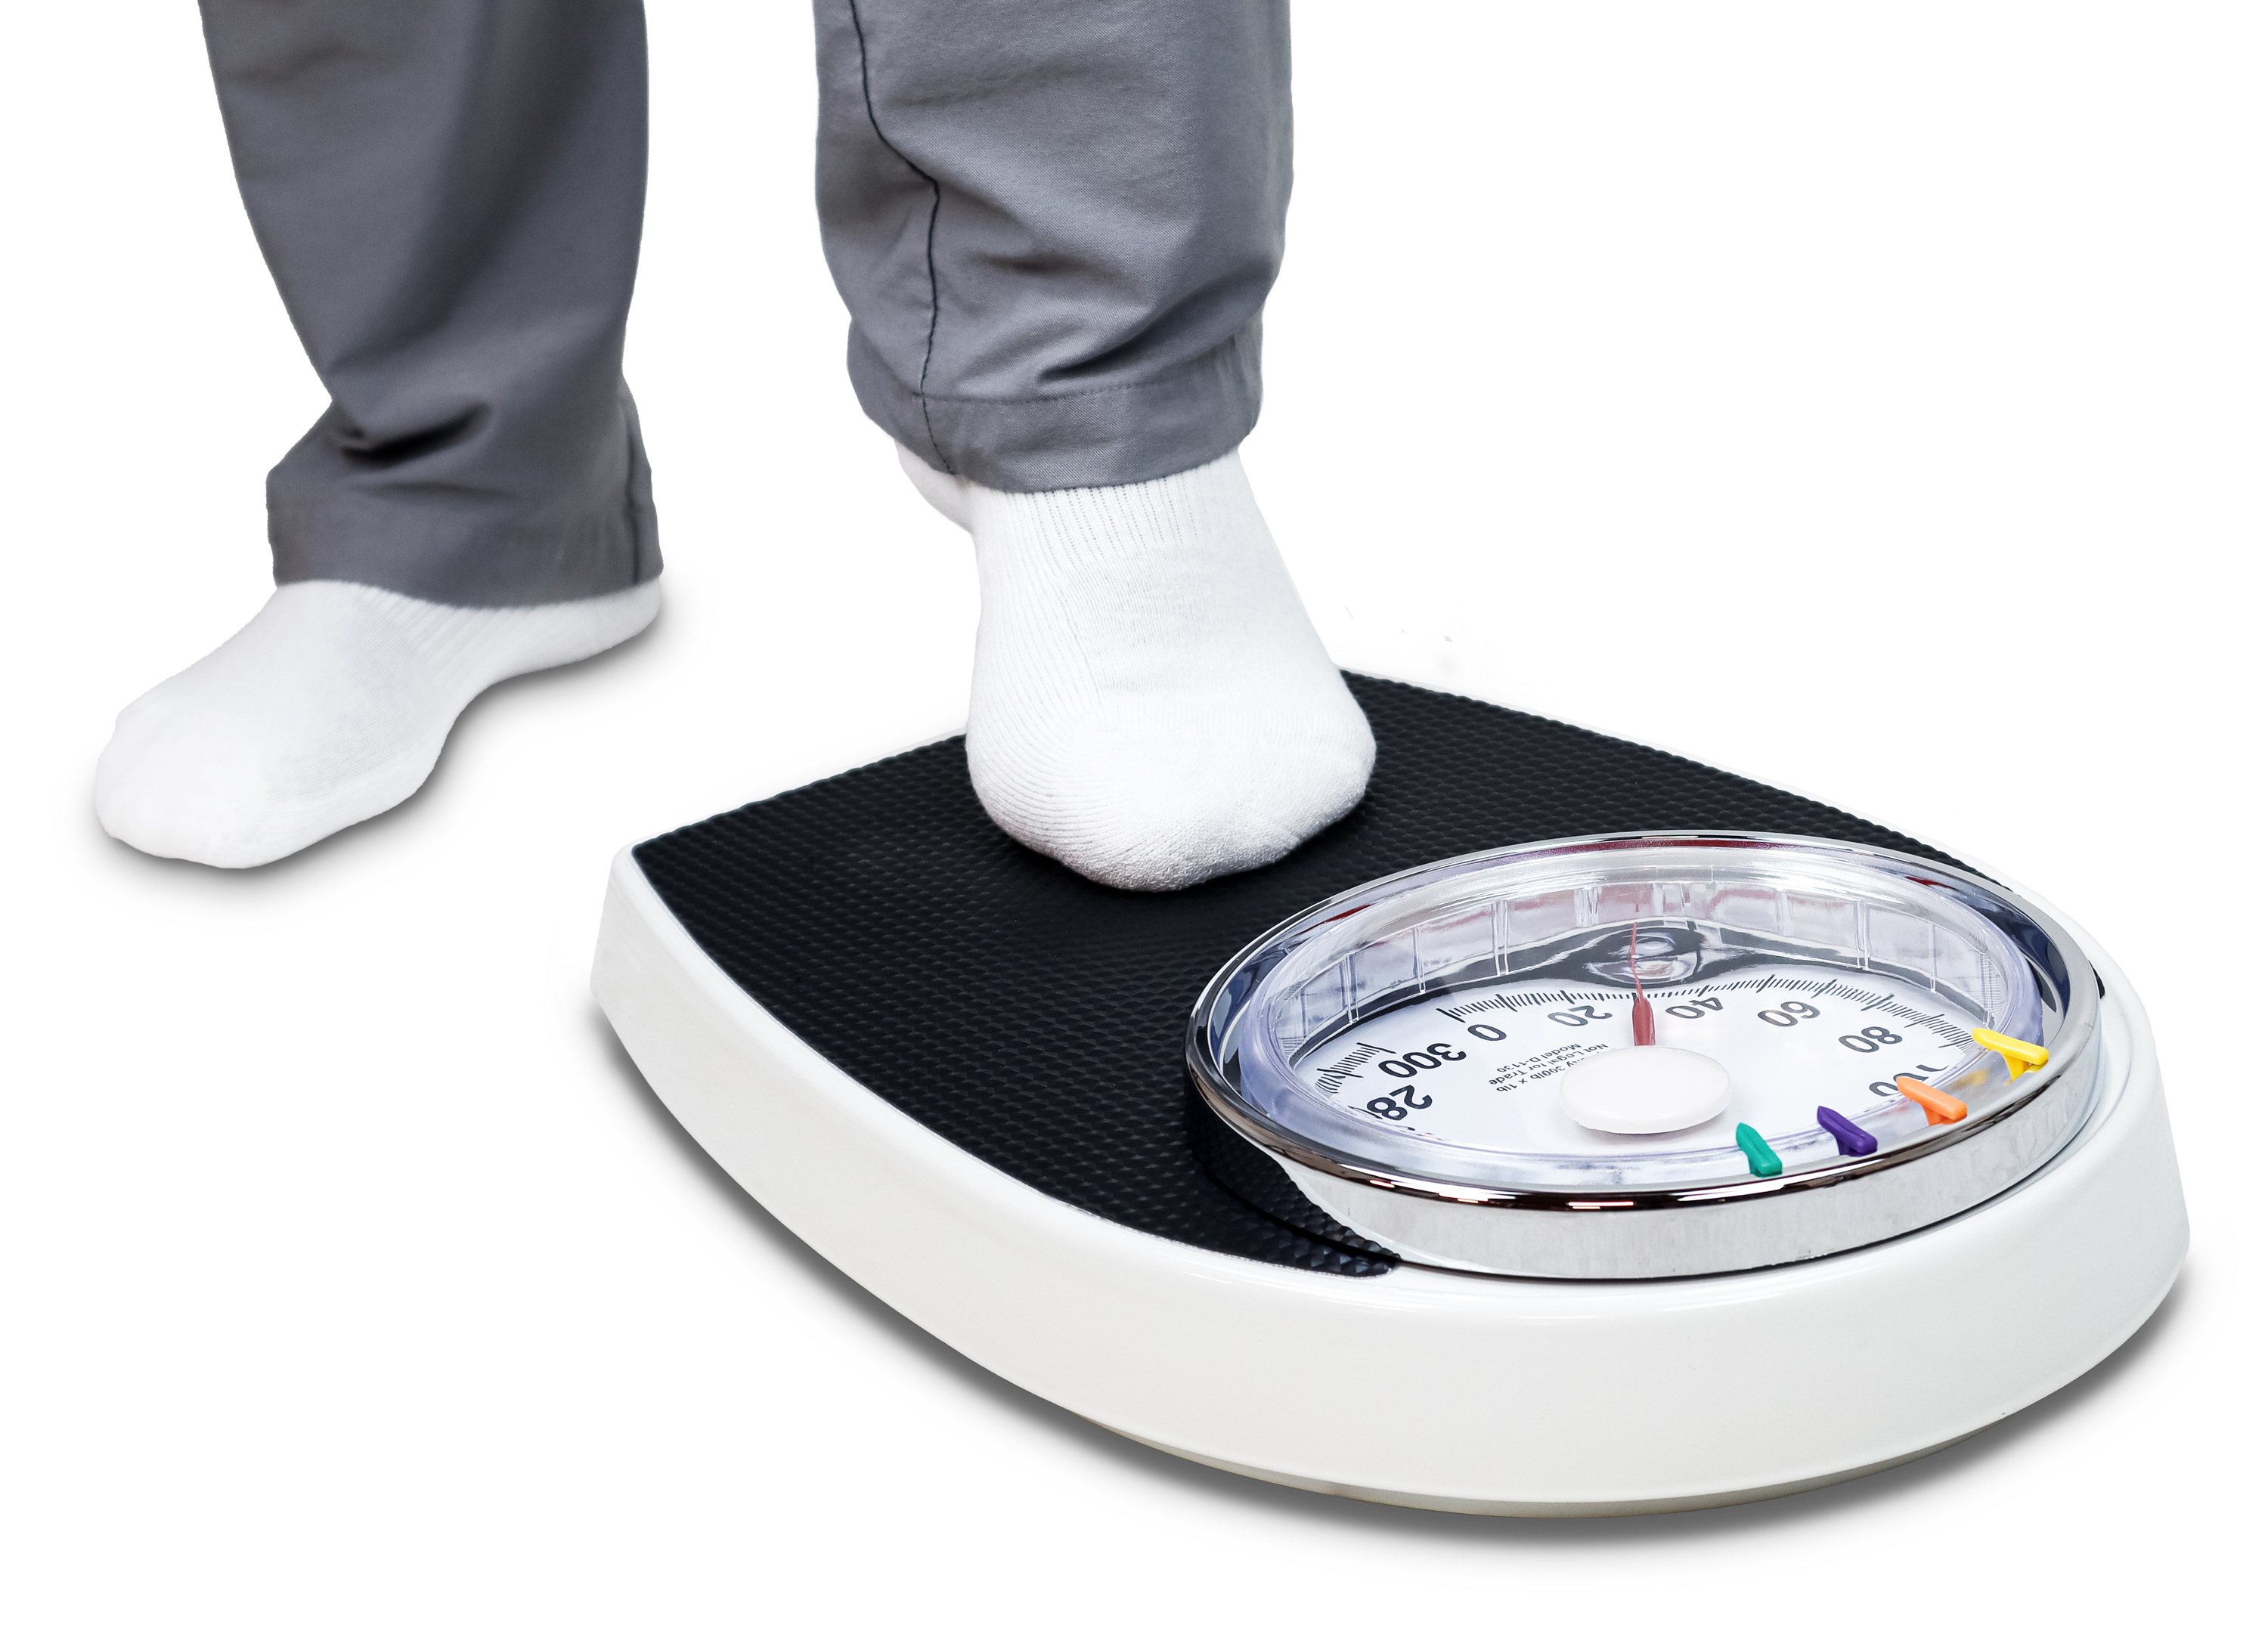 Detecto D1130 Personal Scale